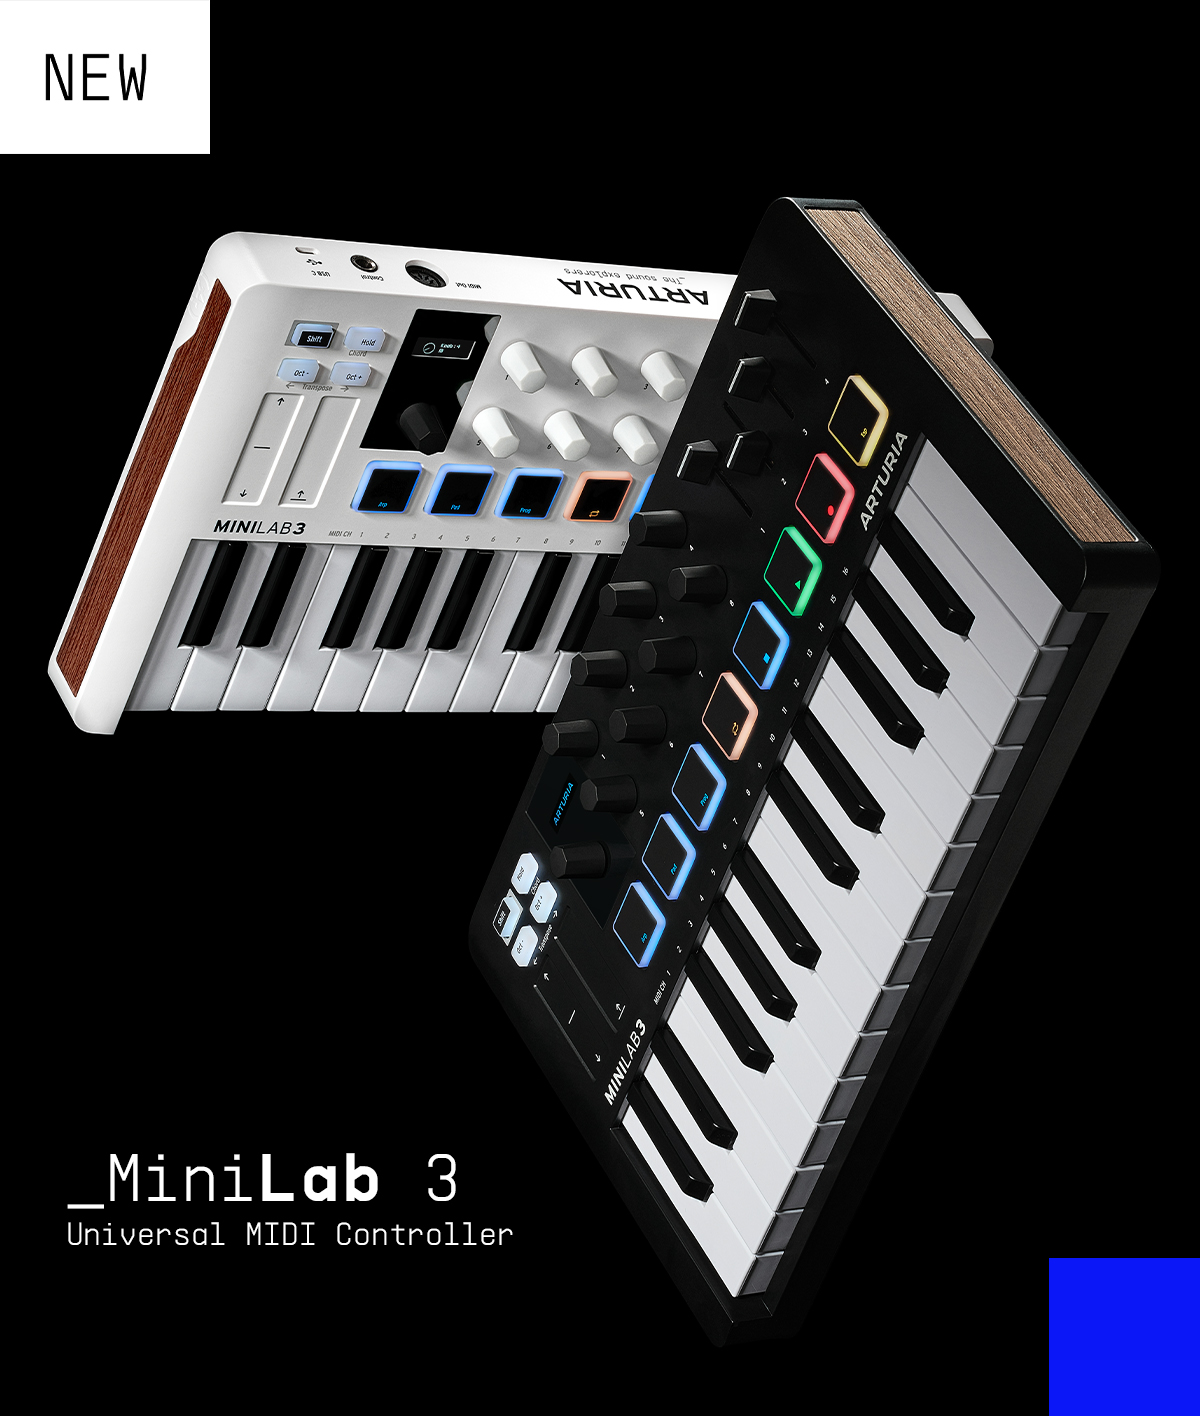 ARTURIA MINILAB 3 - Before you buy it, watch this